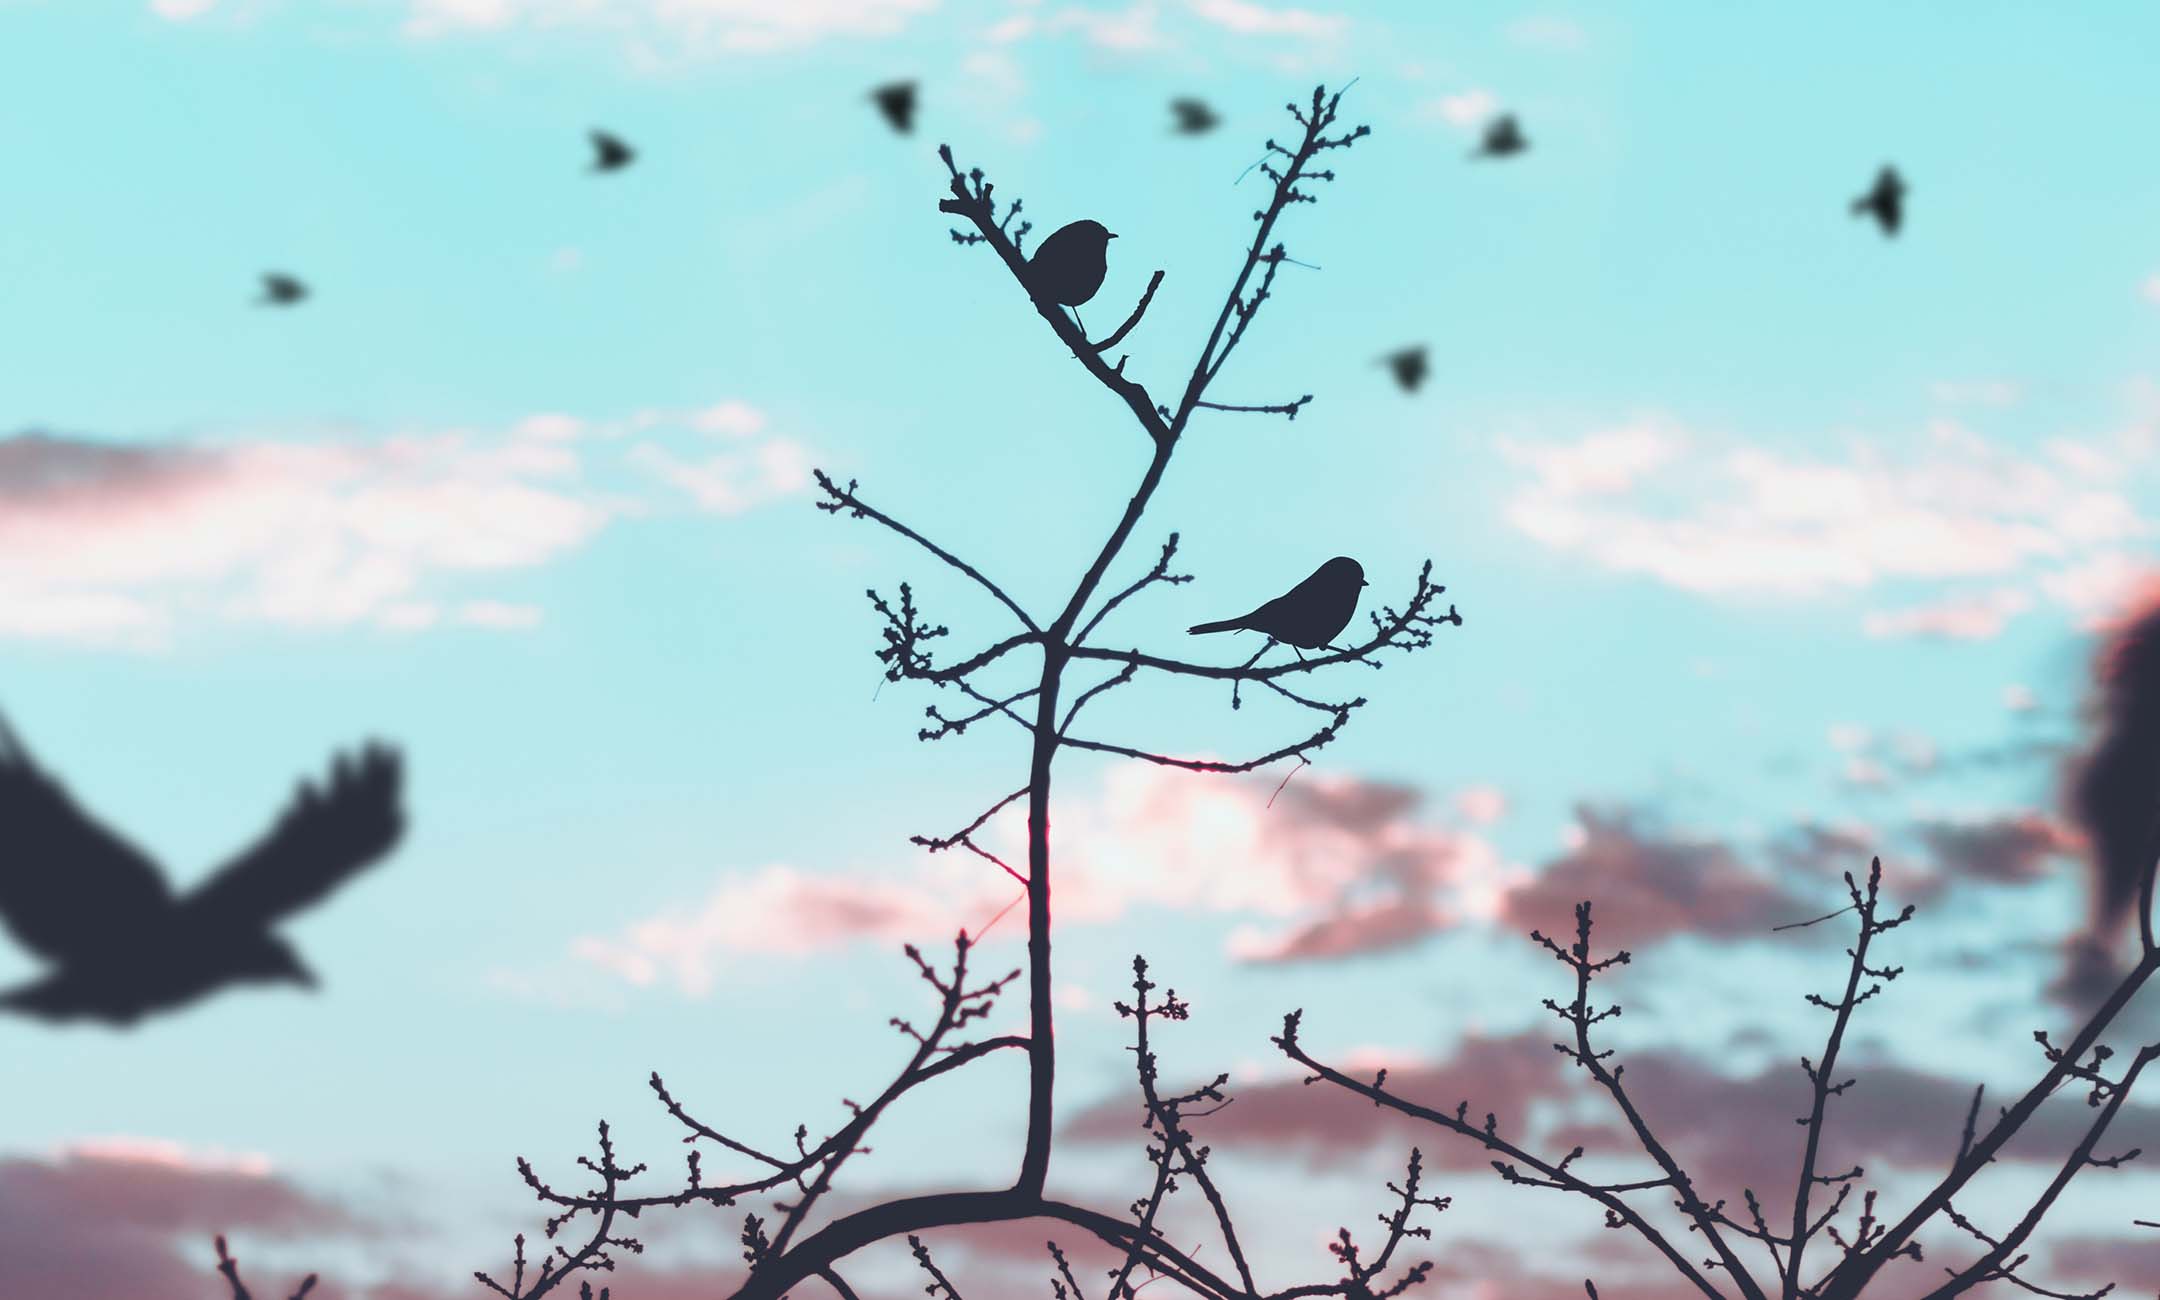 Silhouetted birds perched on a tree branch.